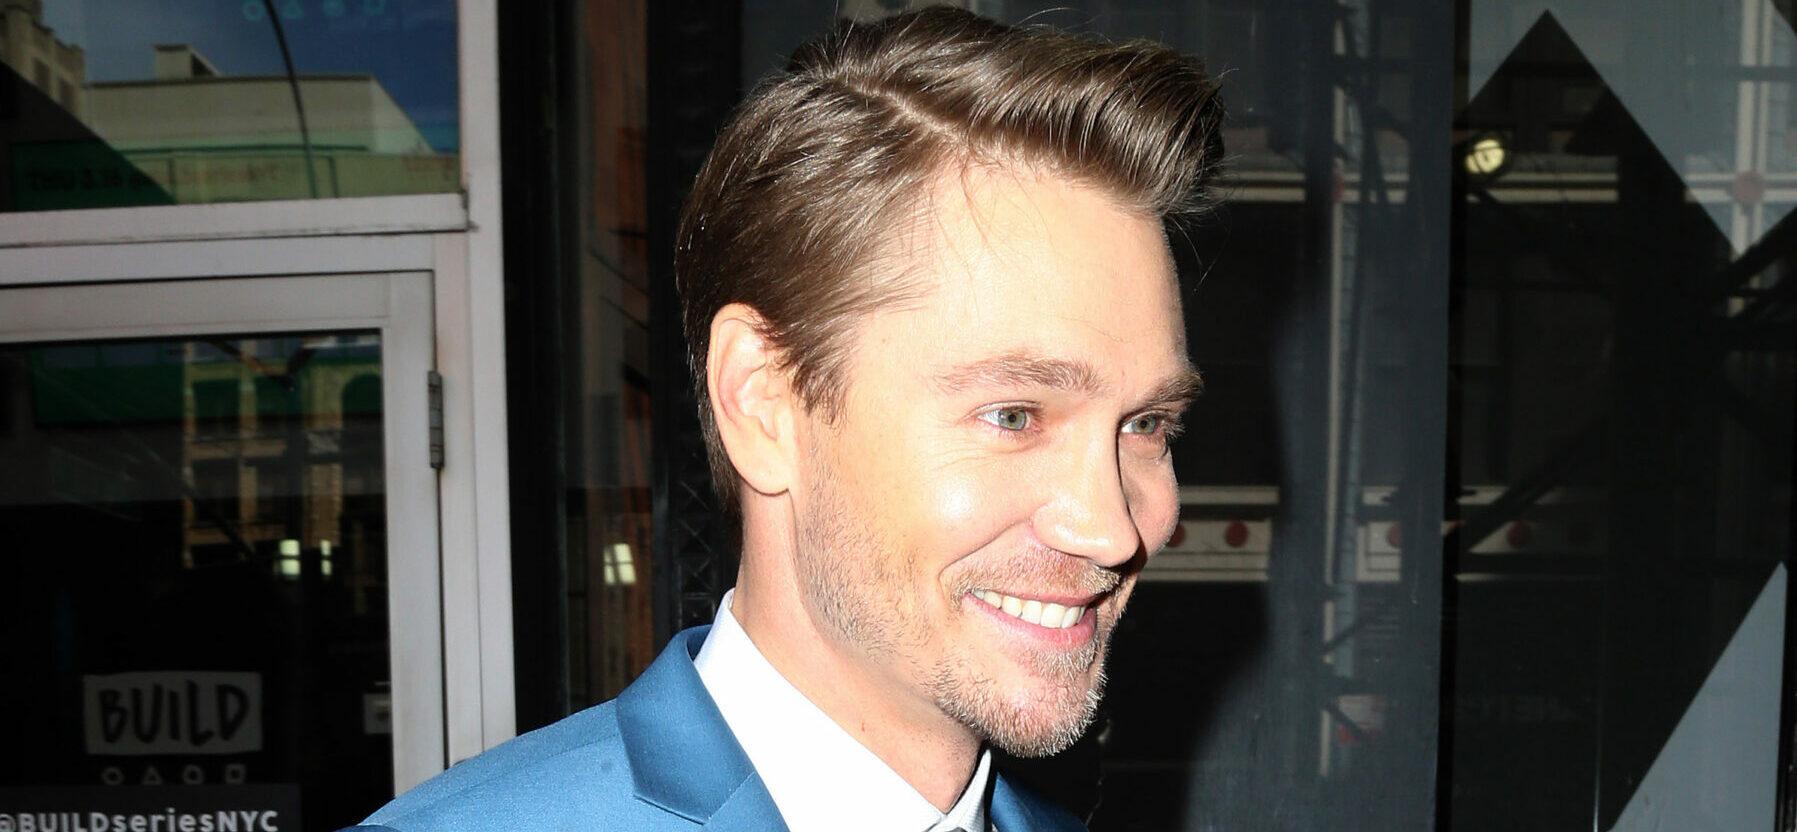 Chad Michael Murray at AOL Building in New York City